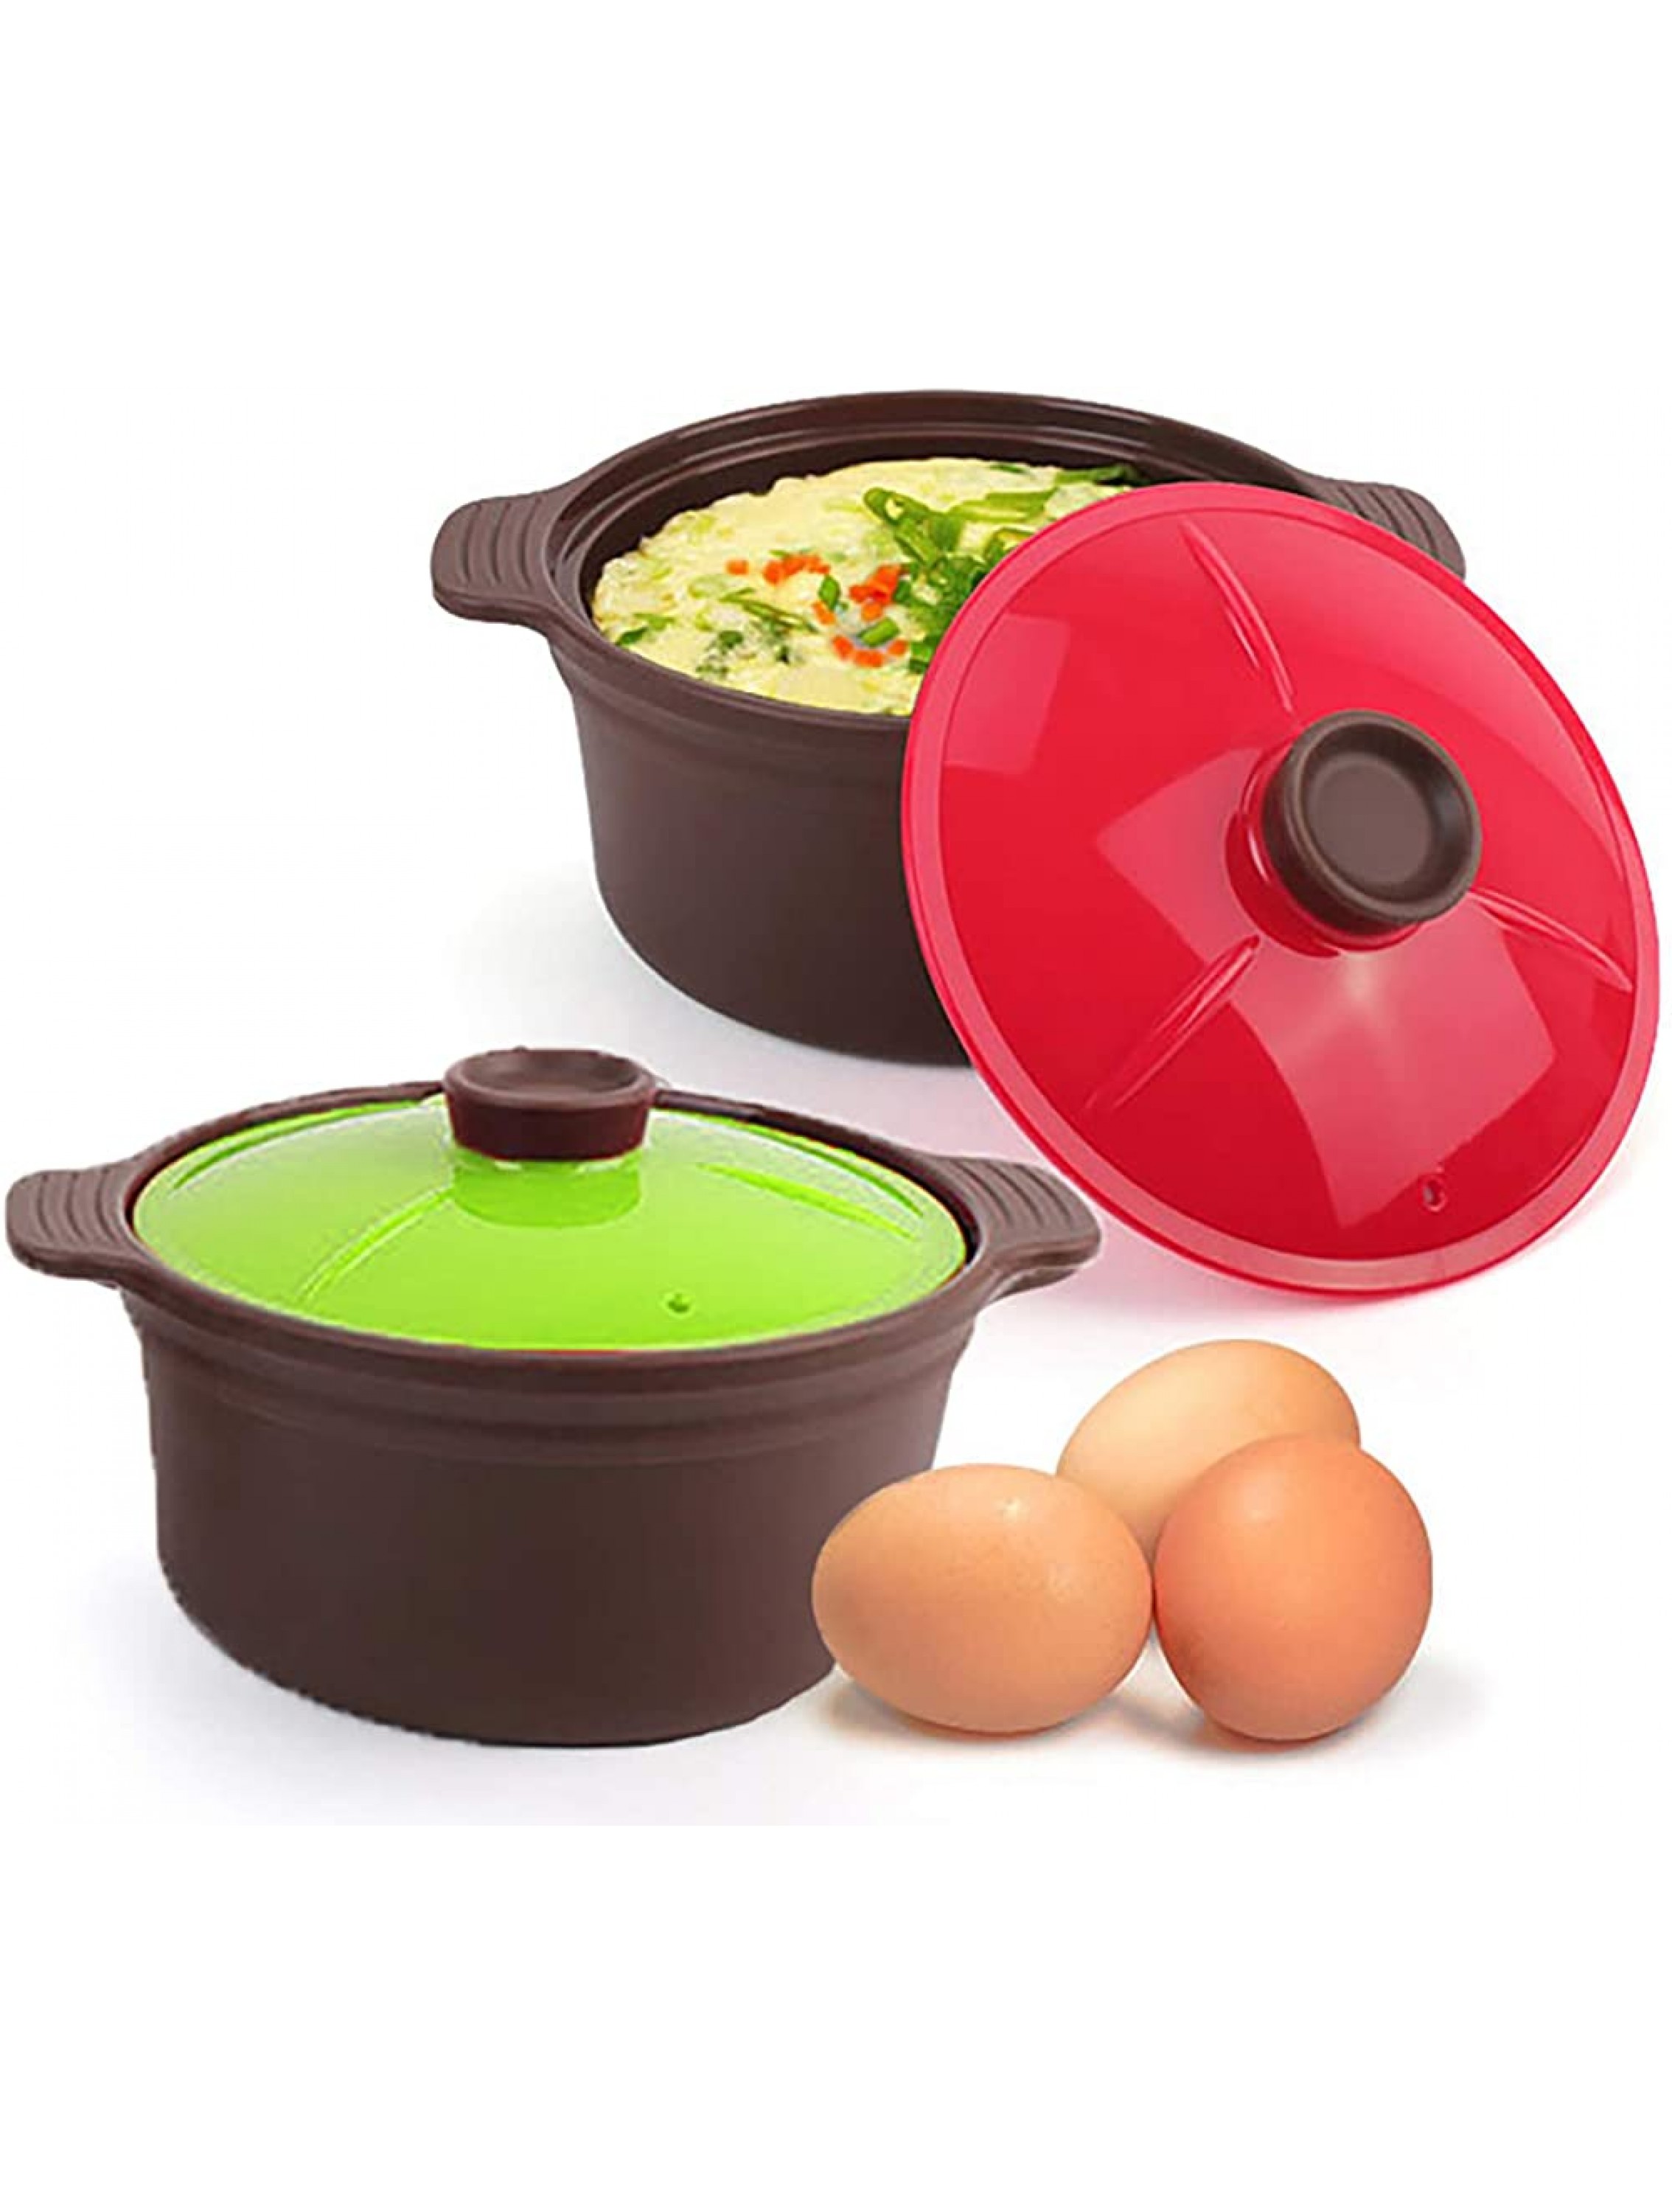 Microwave Silicone Food Steamer with Handle & Lid Set of 2 | Microwave Dishwasher & Oven Safe up to 482 °F | BPA Free 100% Toxic Free Easy to Clean | Made in Korea 20.3 Fl Oz 600ml 2.5 Cups Colored Lid - BBXP78M4L